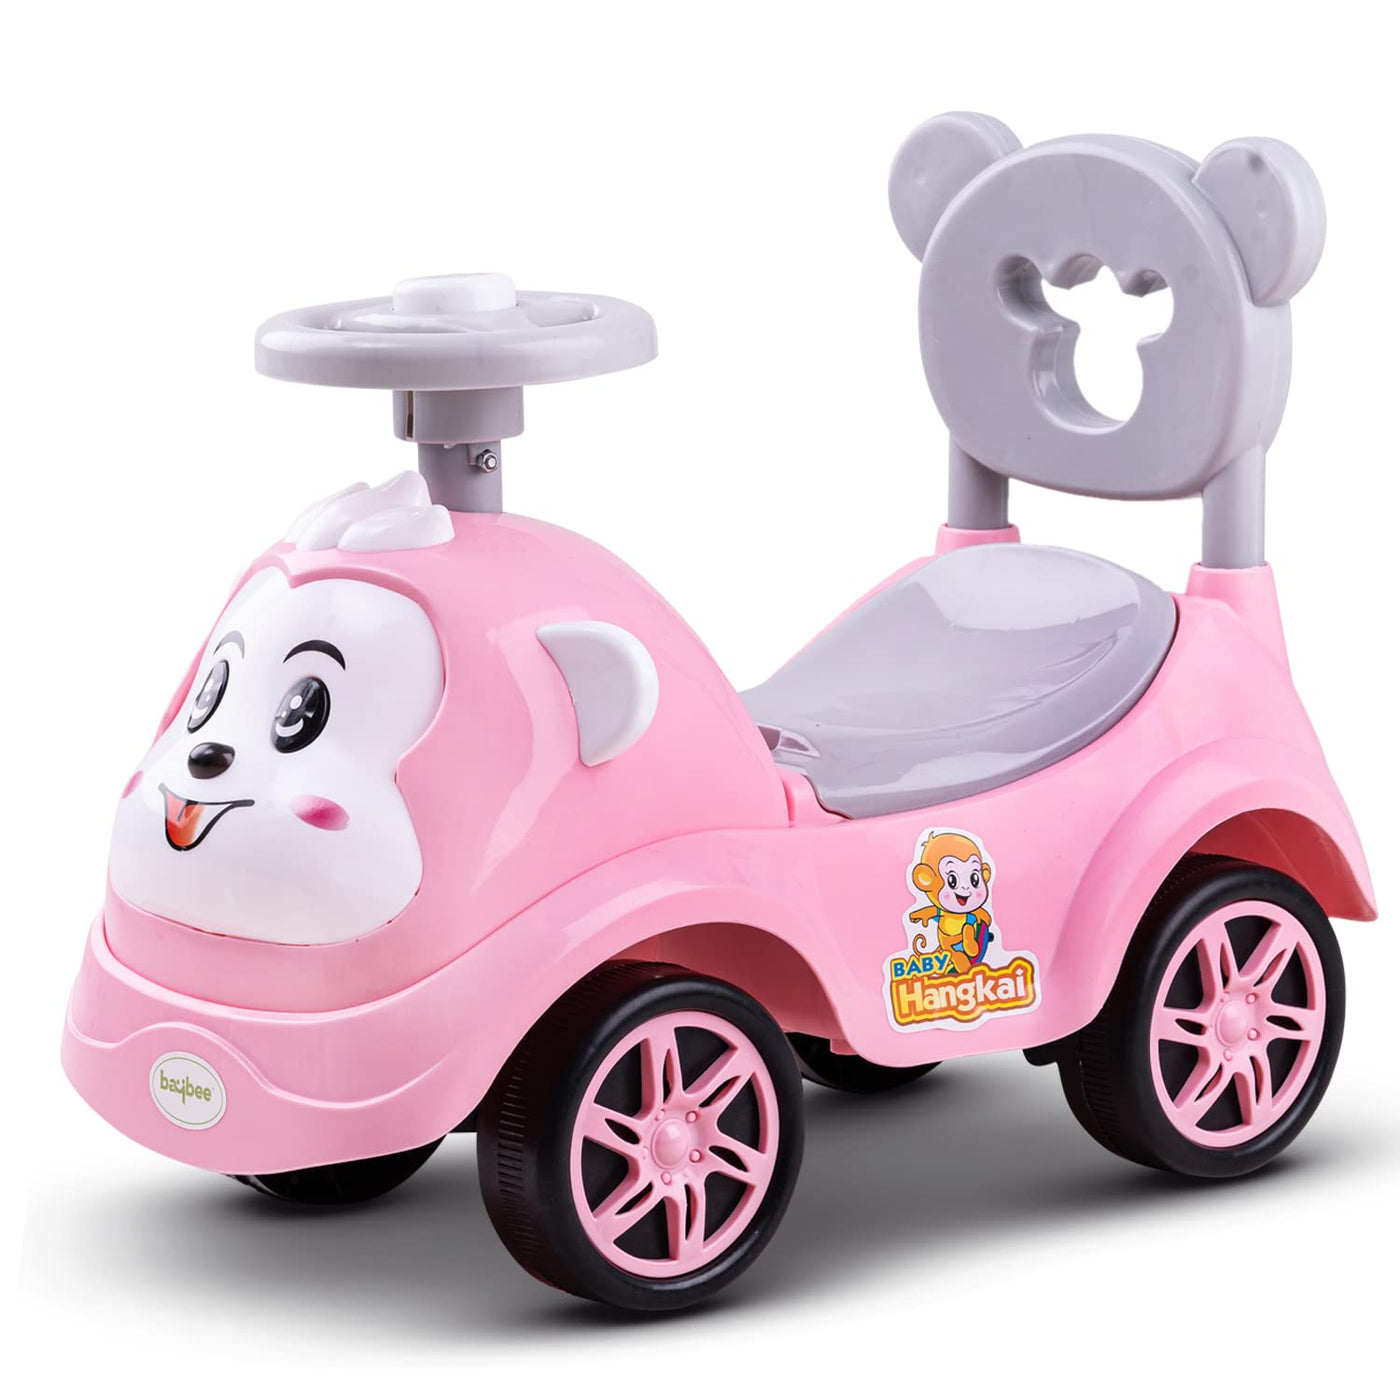 Baybee Monkey Push Ride On Cars  Manual Push Toys for 3-5 Year